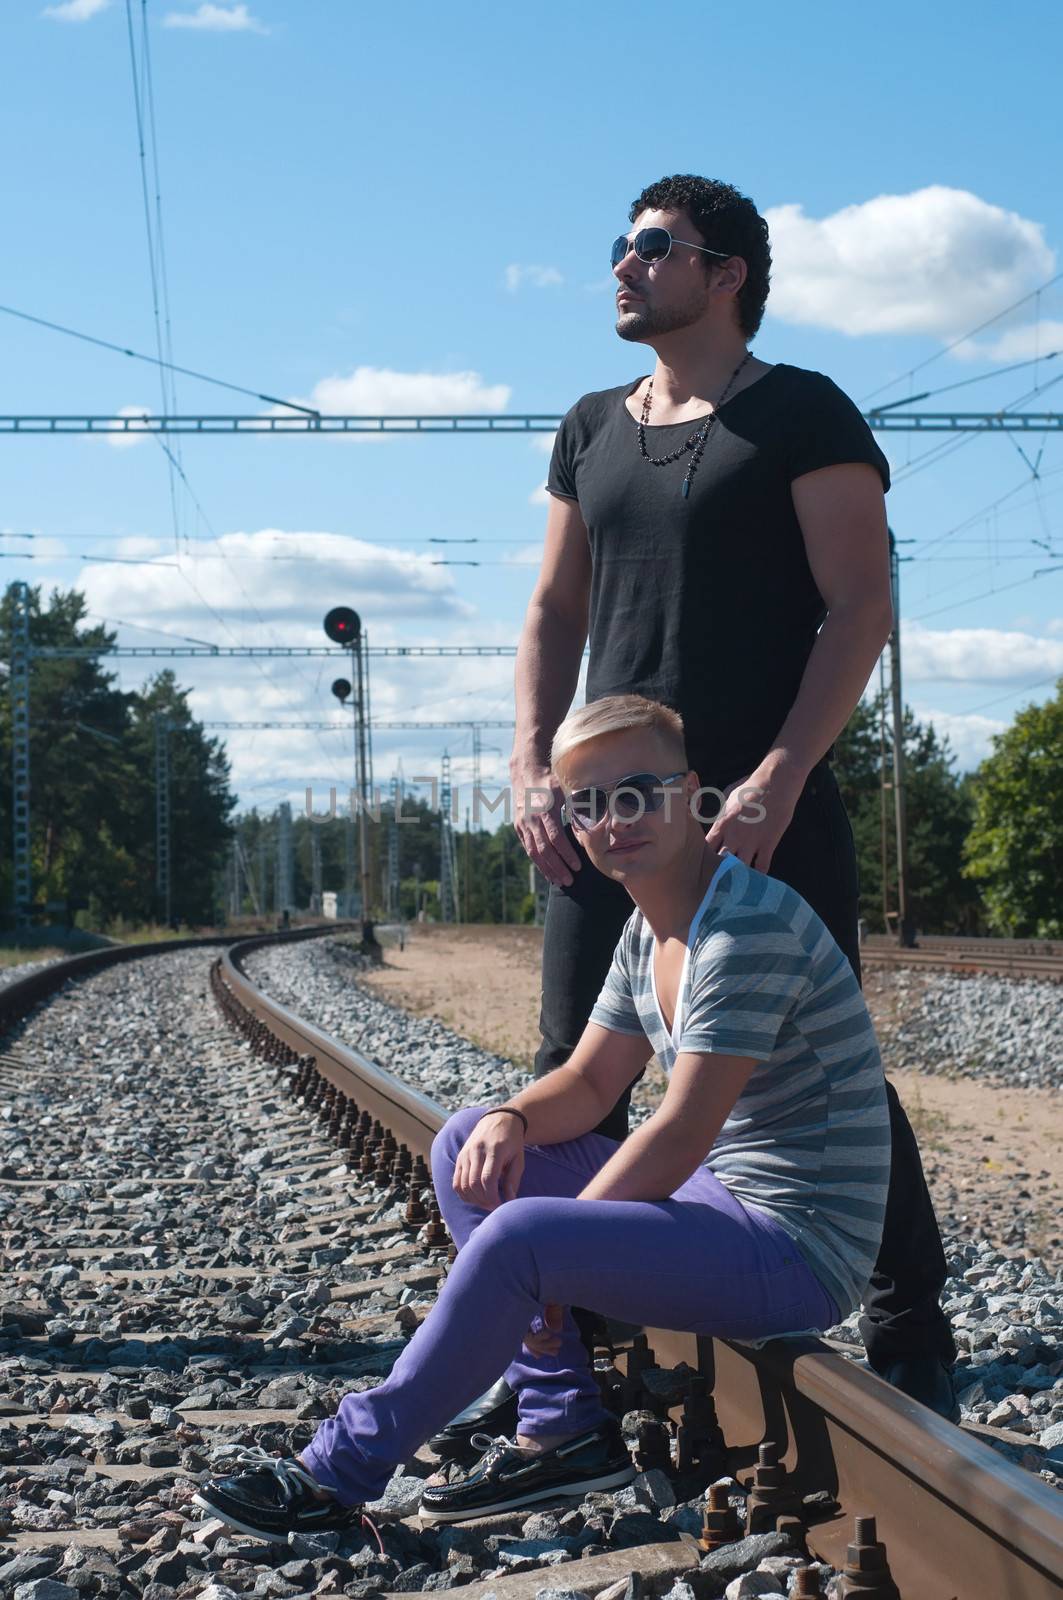 Shot of two young men on train tracks